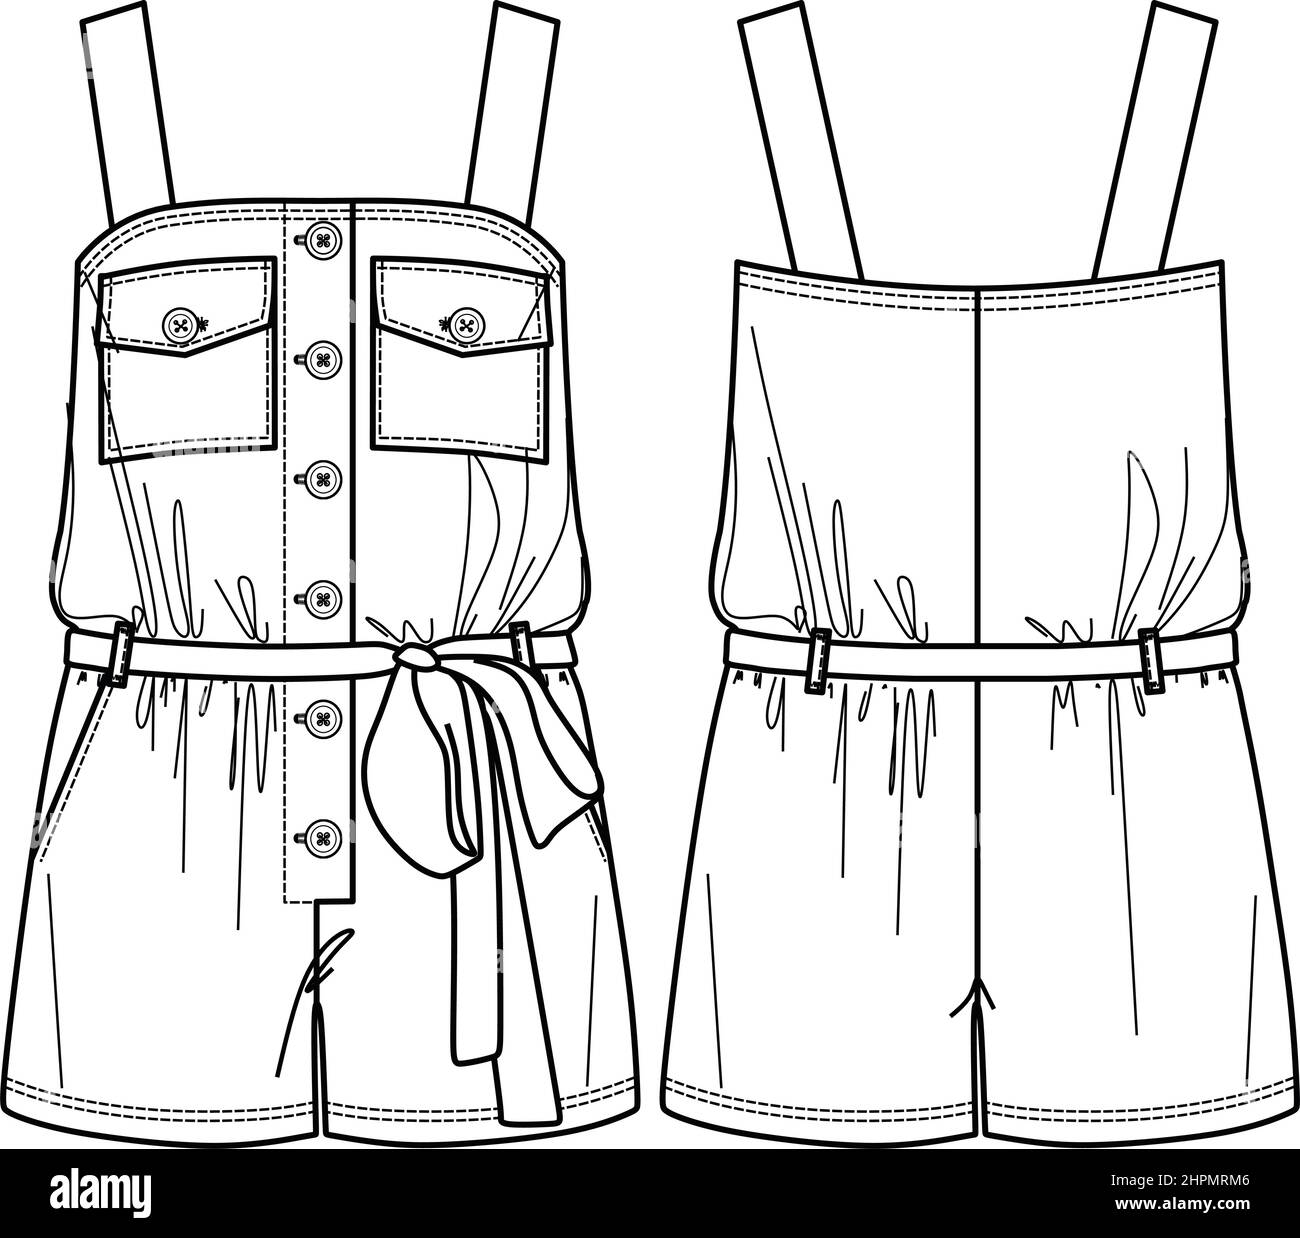 Jumpsuit sketch Cut Out Stock Images & Pictures - Alamy